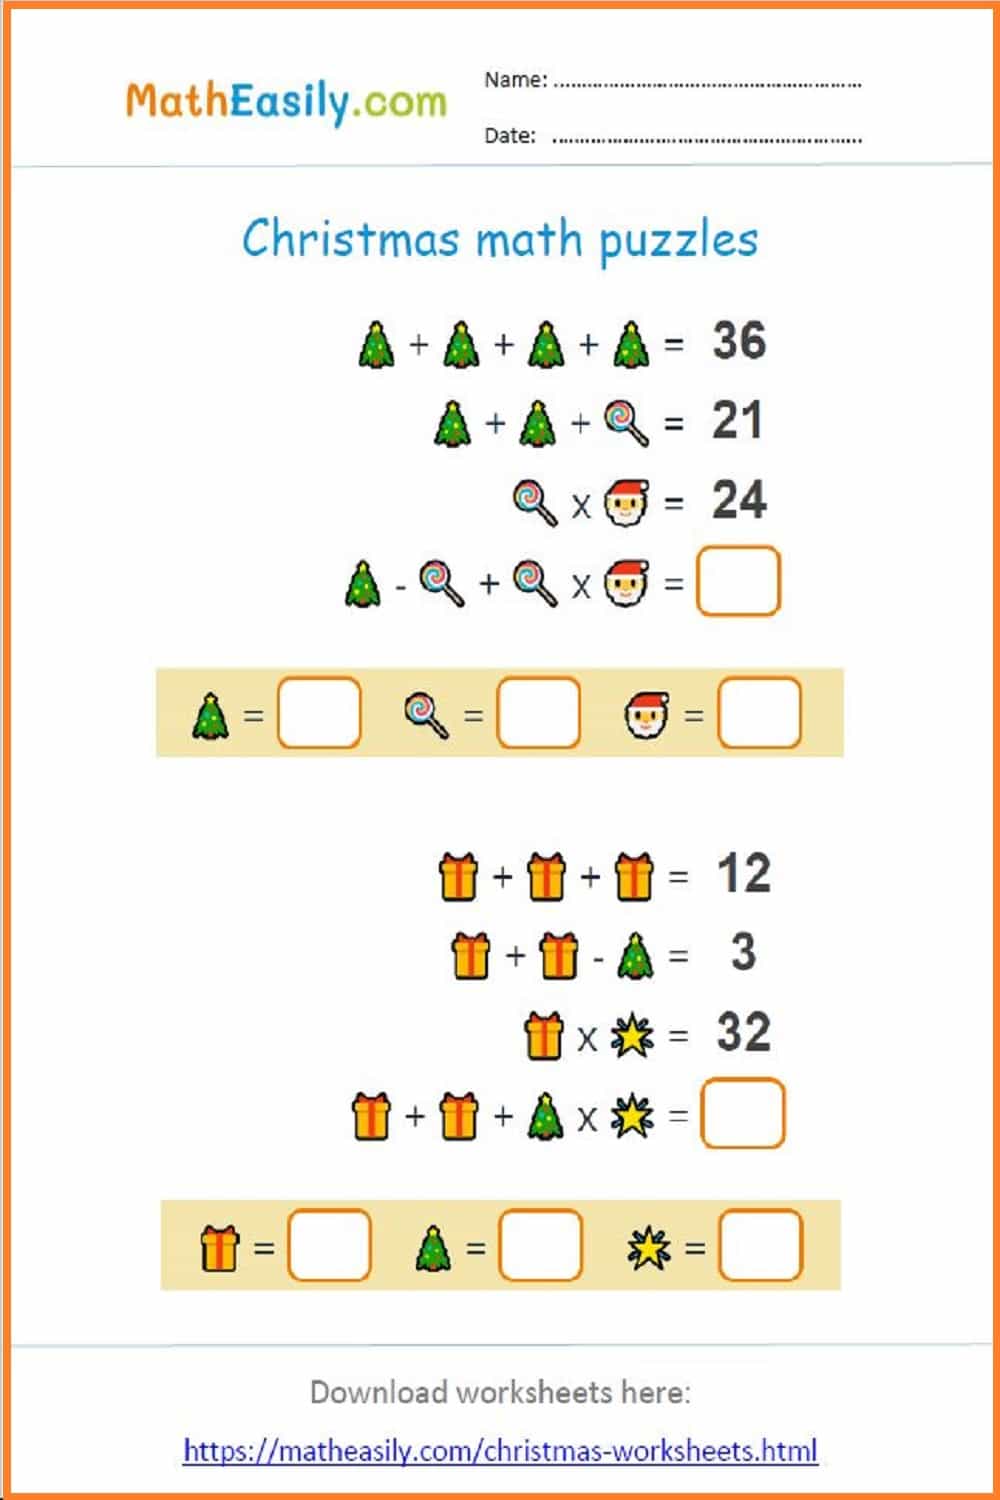 Download free maths Christmas puzzles worksheets. Emoji christmas math puzzles PDF. 
Fun Christmas math puzzles PDF. christmas logic puzzles free printable. Free printable christmas math puzzles printable.
Christmas emoji puzzles. math playground christmas puzzles. Christmas emoji maths. Free christmas math puzzles pdf.
Christmas math activities PDF. Christmas math logic puzzles. holiday math puzzles printable. christmas emoji worksheet.
christmas picture puzzle game answer key.